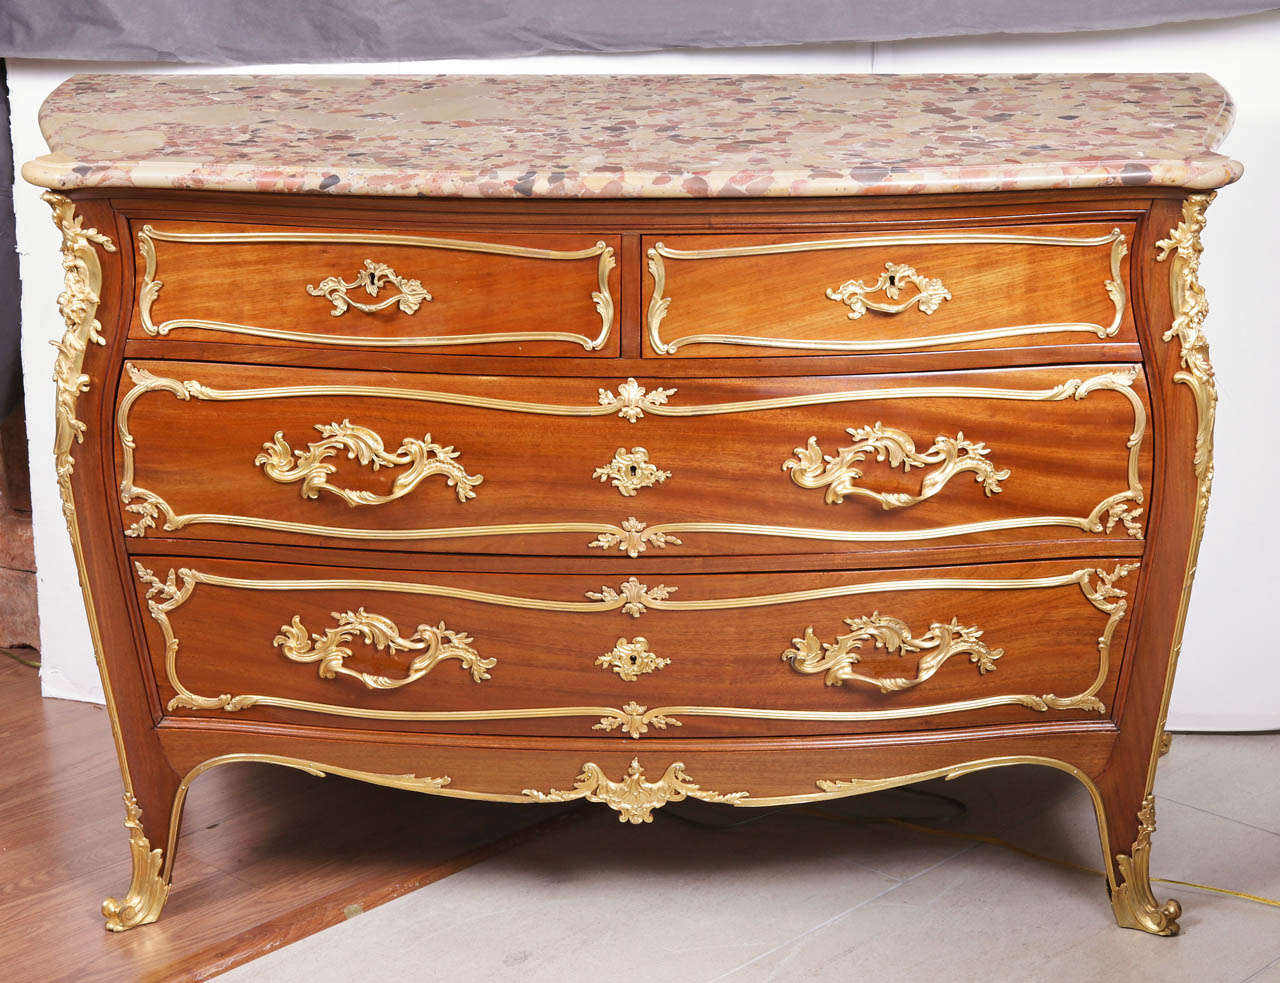 19th c French Louis XV bronze dore mounted kingwood commode. Breche De alep marble top. The commode is pictured in The Linke book by Christopher Payne.